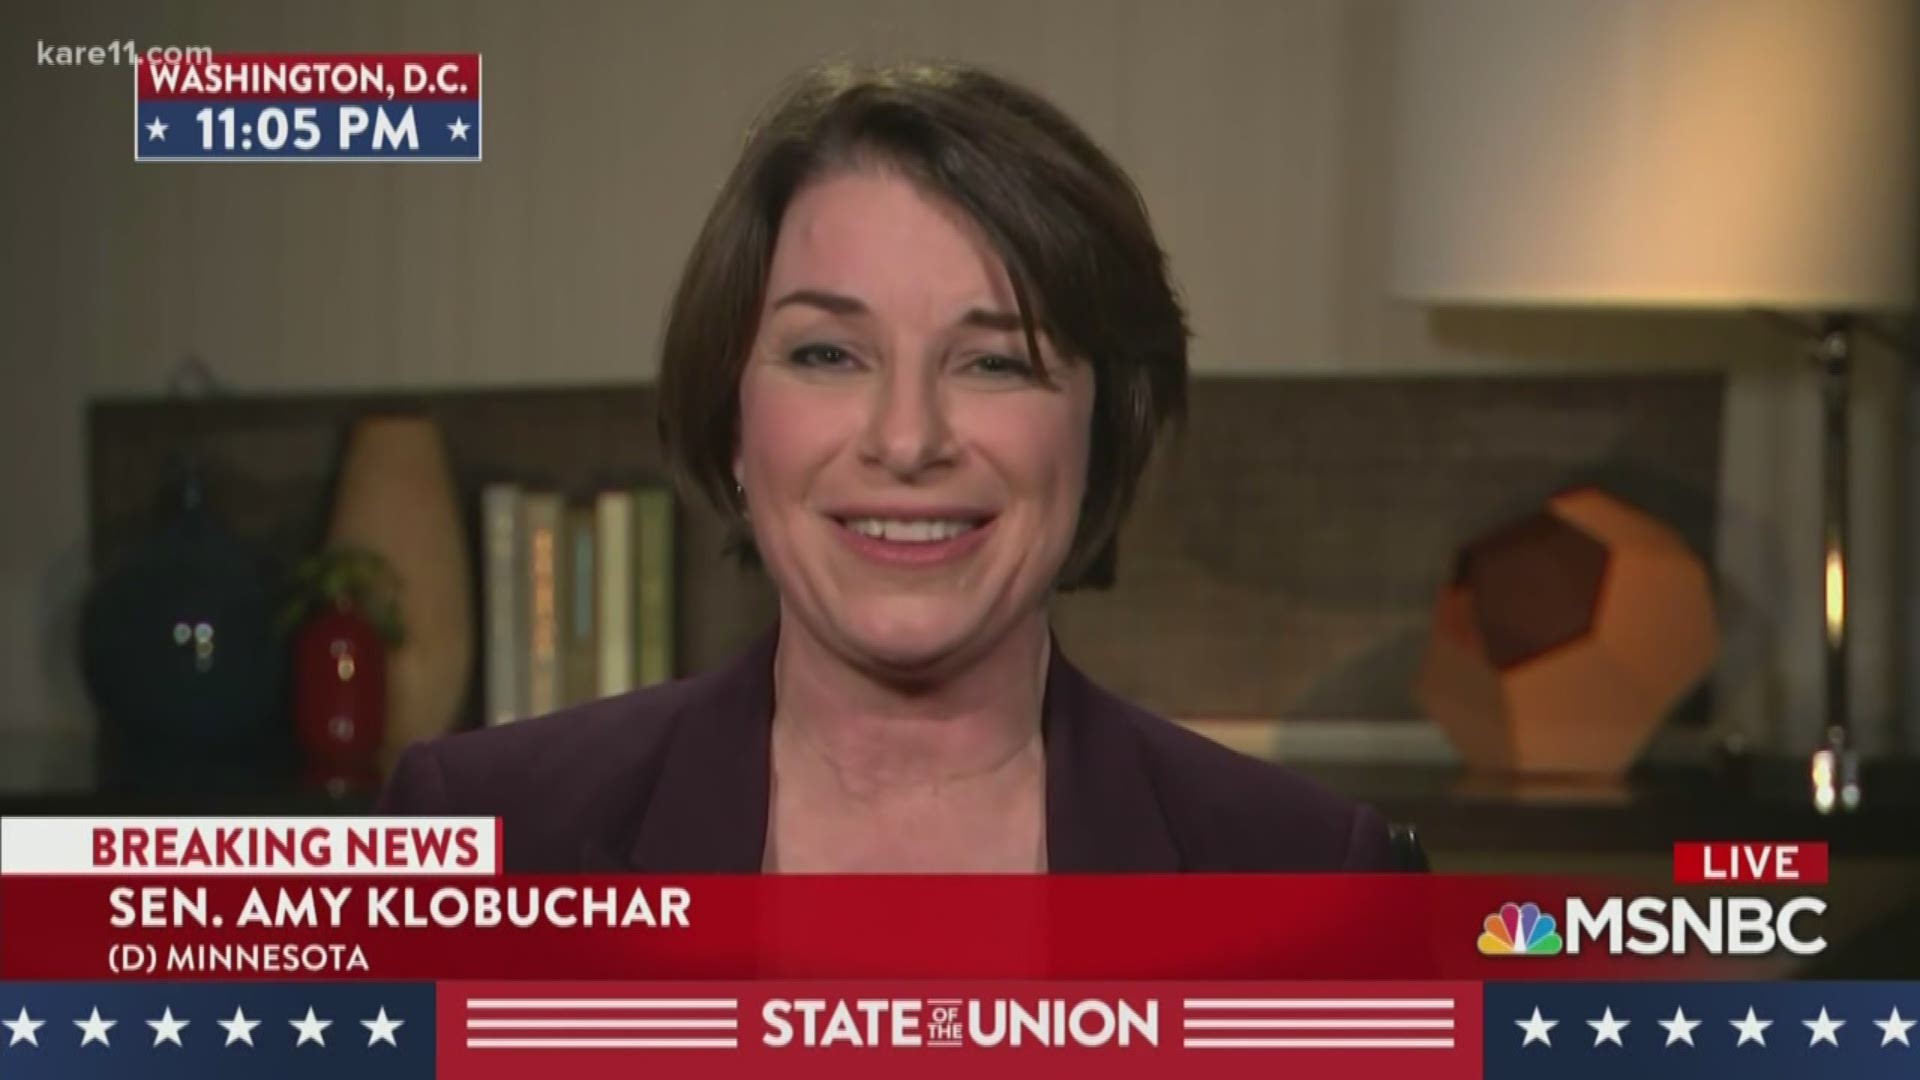 Sen. Amy Klobuchar appeared on MSNBC on Tuesday evening after President Donald Trump’s State of the Union address. Klobuchar said she’ll be making an announcement on Sunday, Feb. 10, about speculation surrounding a potential bid for president. https://kare11.tv/2GfIpSi